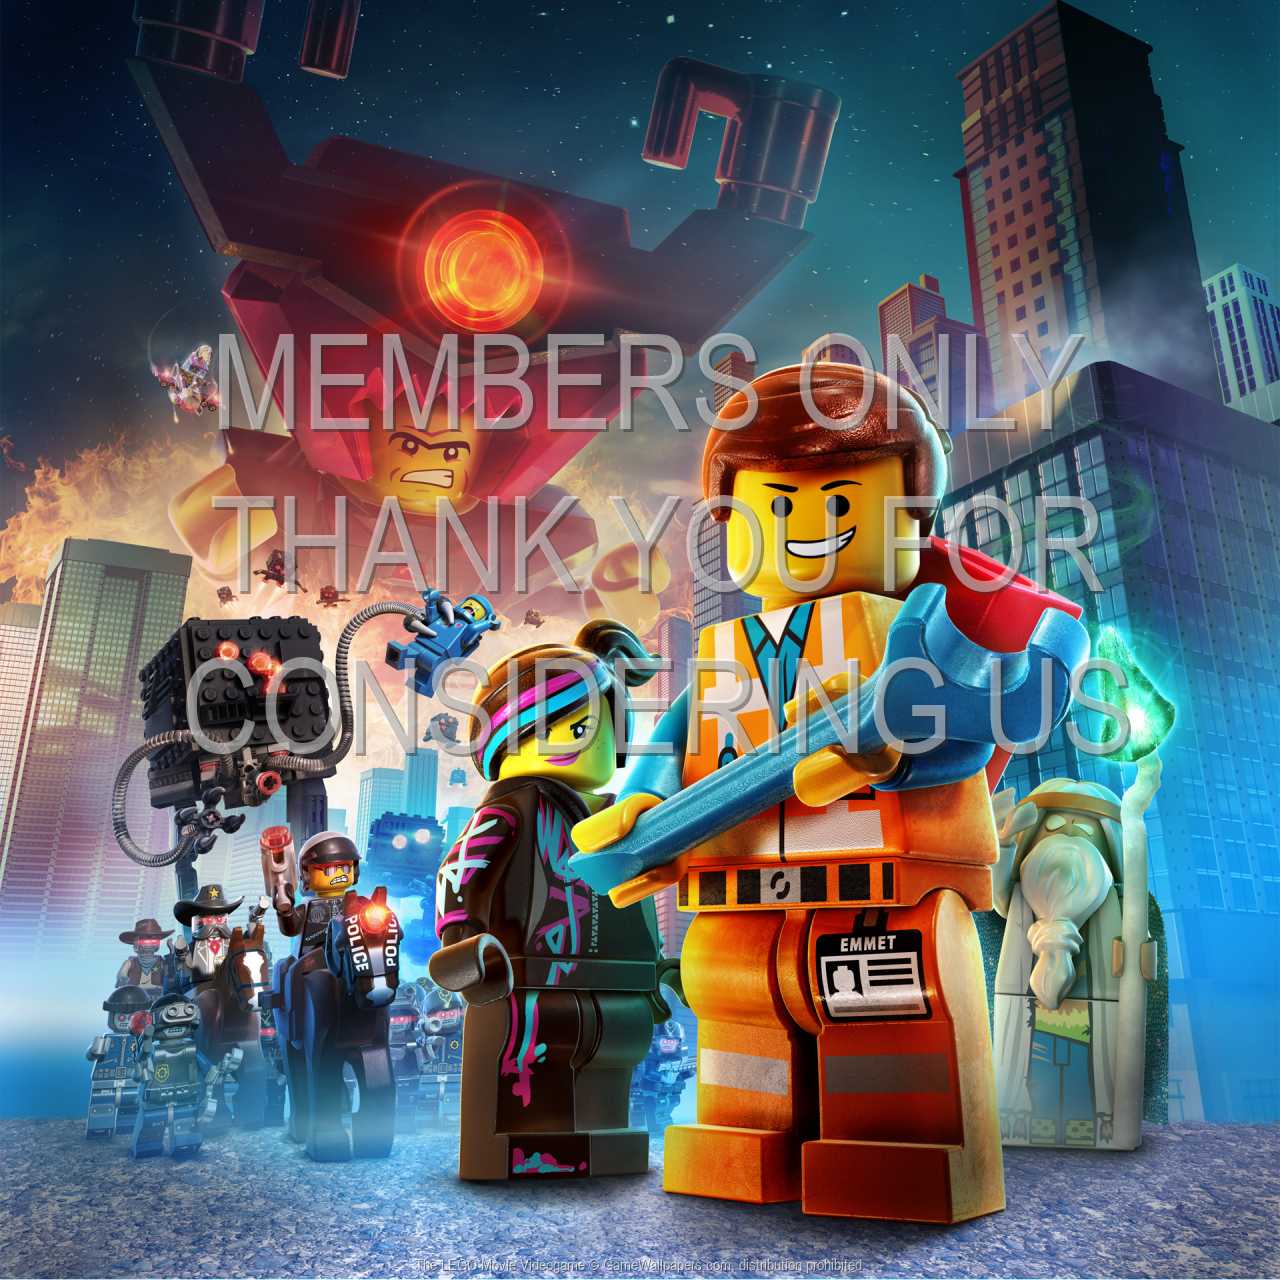 The LEGO Movie Videogame 720p%20Horizontal Mobile wallpaper or background 01